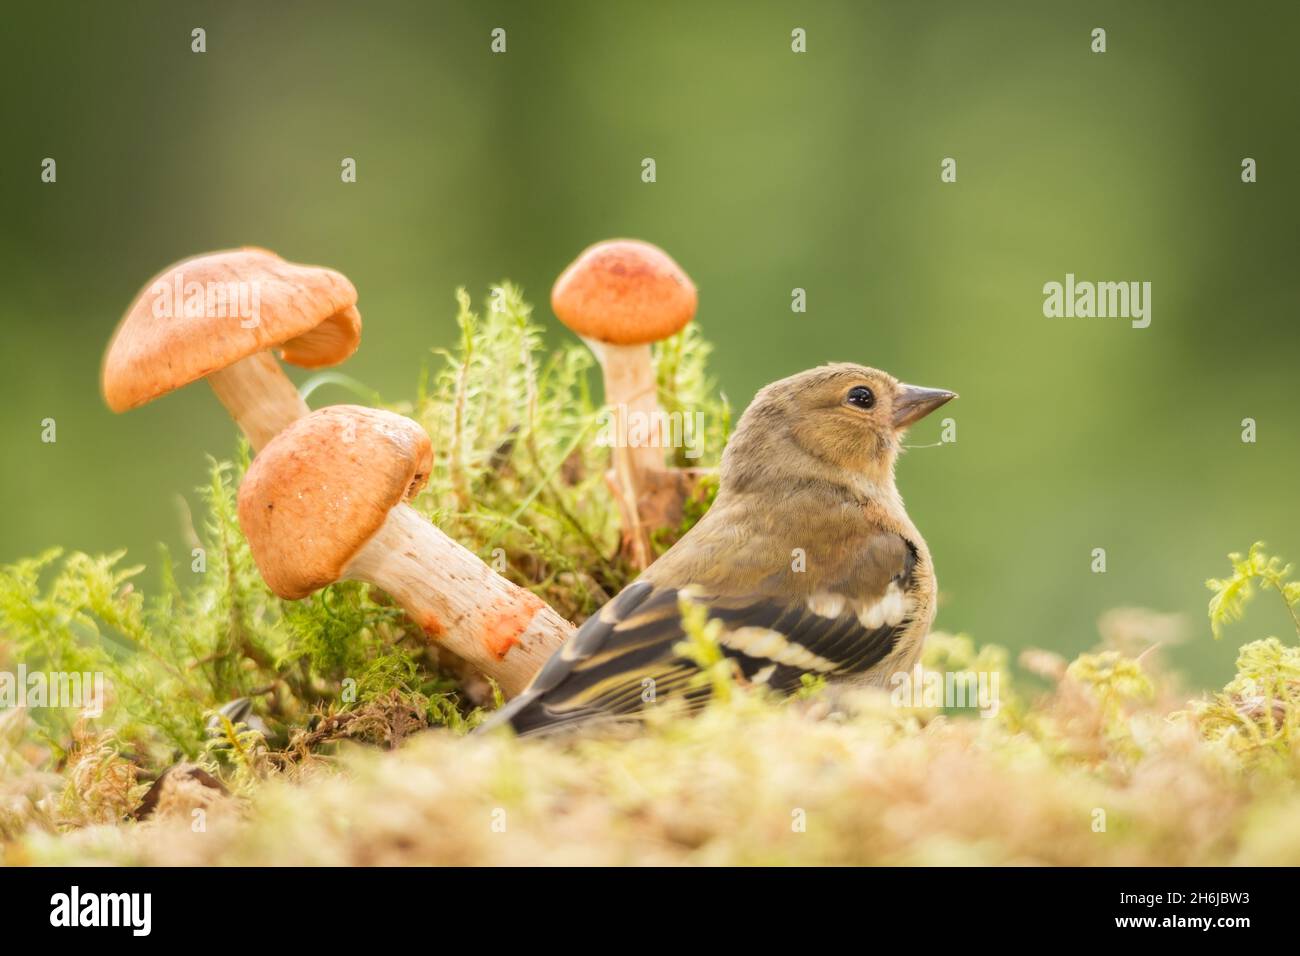 young bullfinch standing with mushrooms Stock Photo